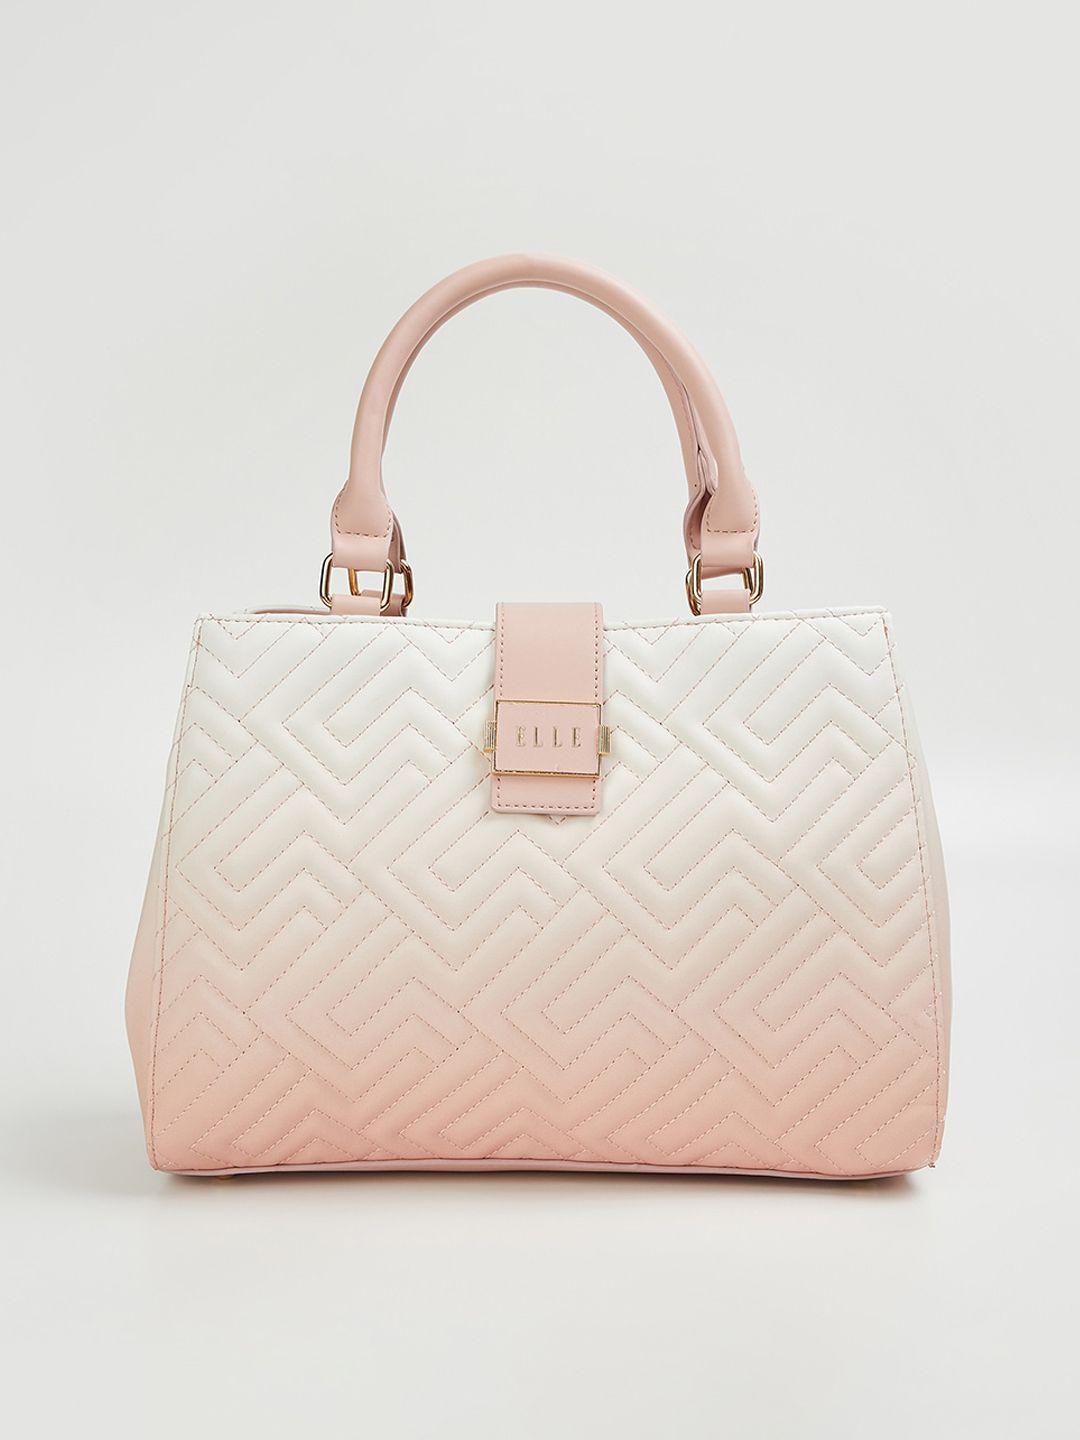 elle textured structured handheld bag with quilted